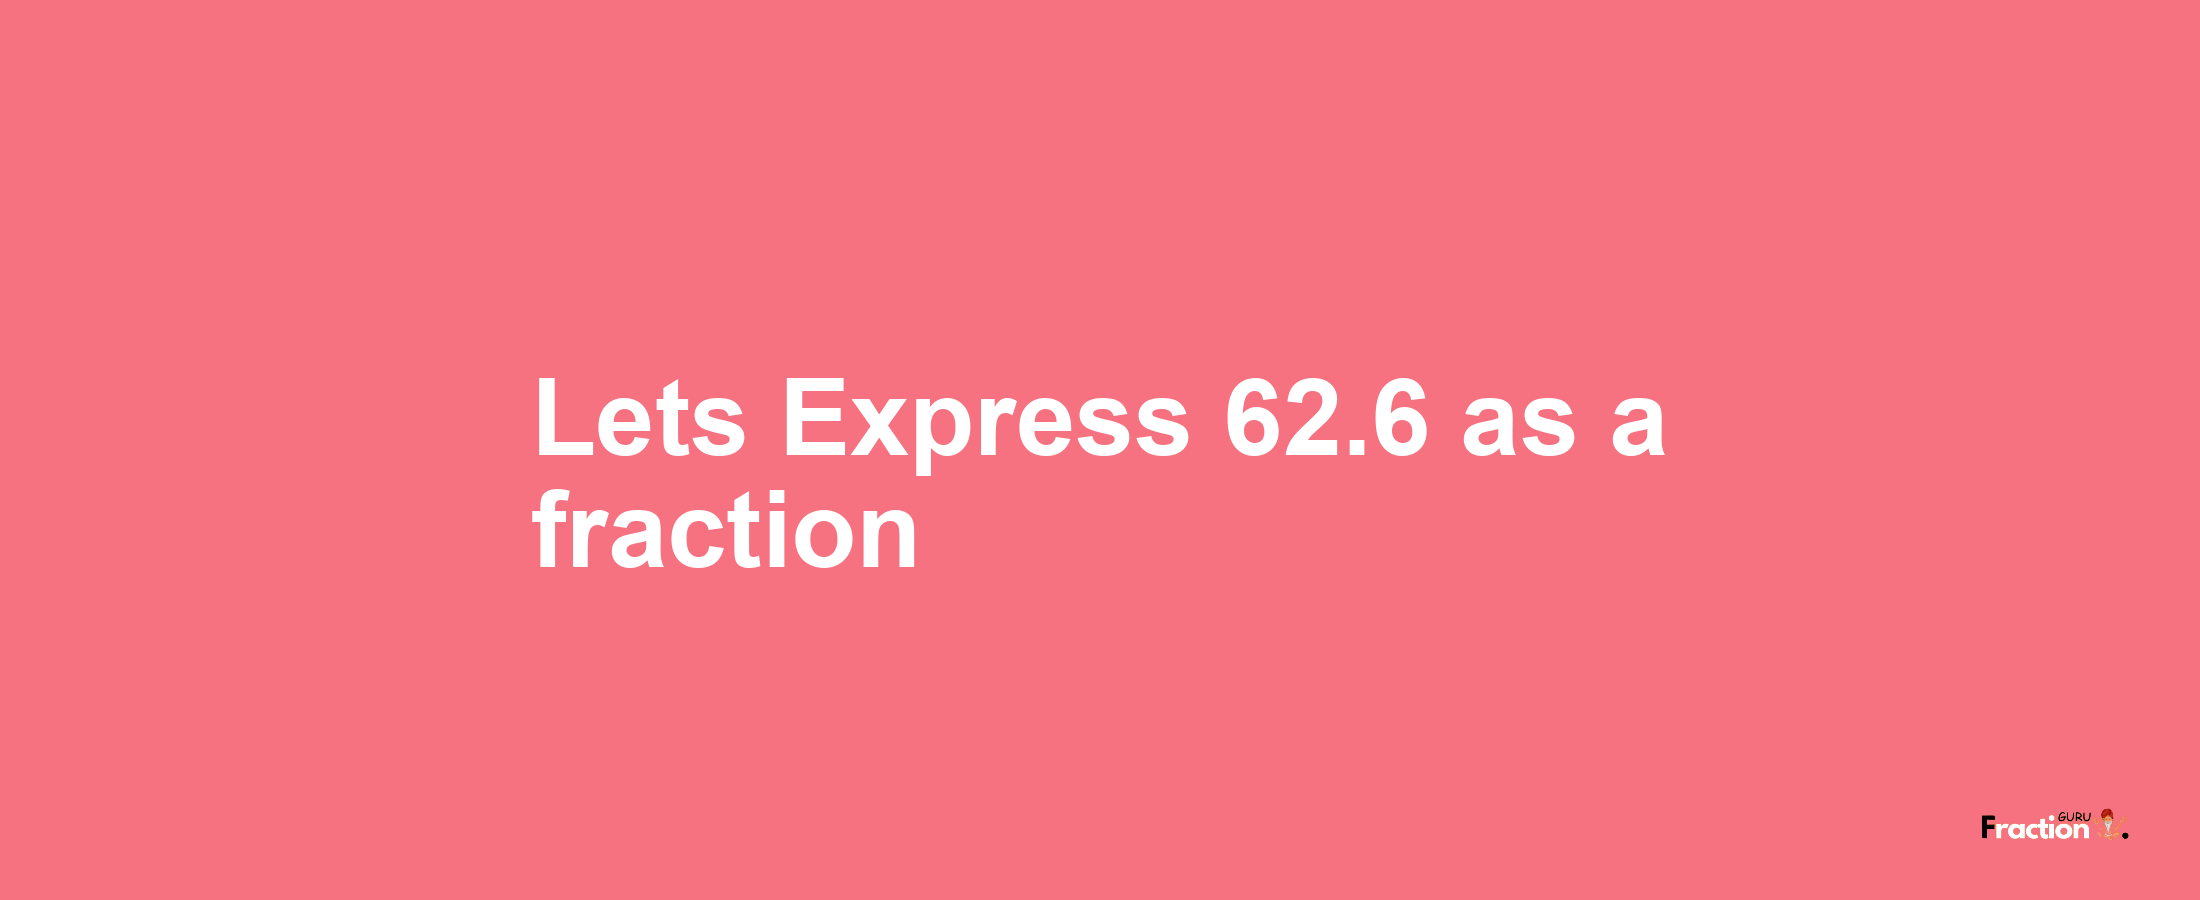 Lets Express 62.6 as afraction